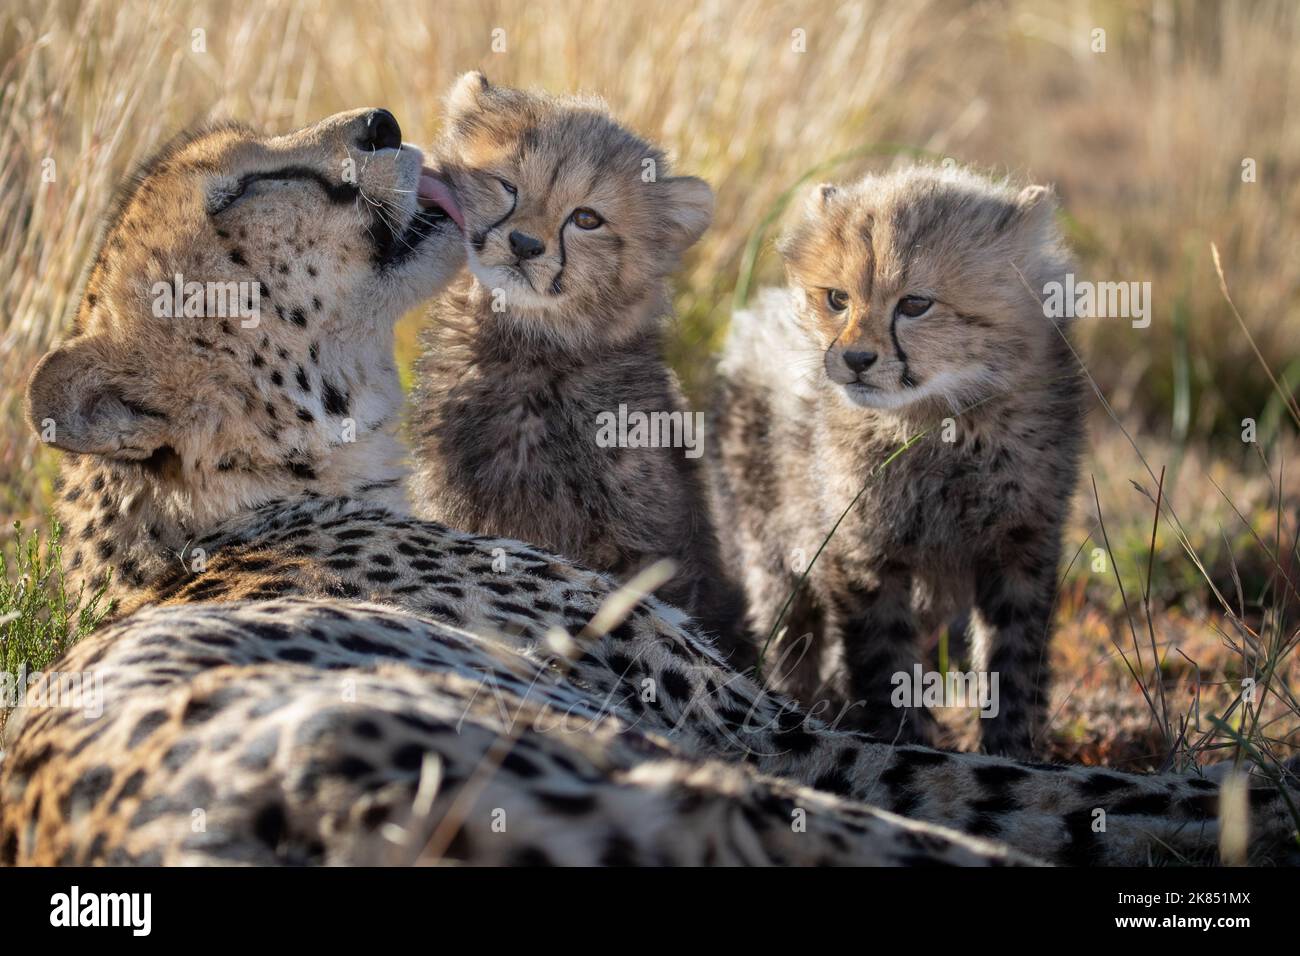 A mom grooming her little cubs, photographed on a safari in South Africa Stock Photo